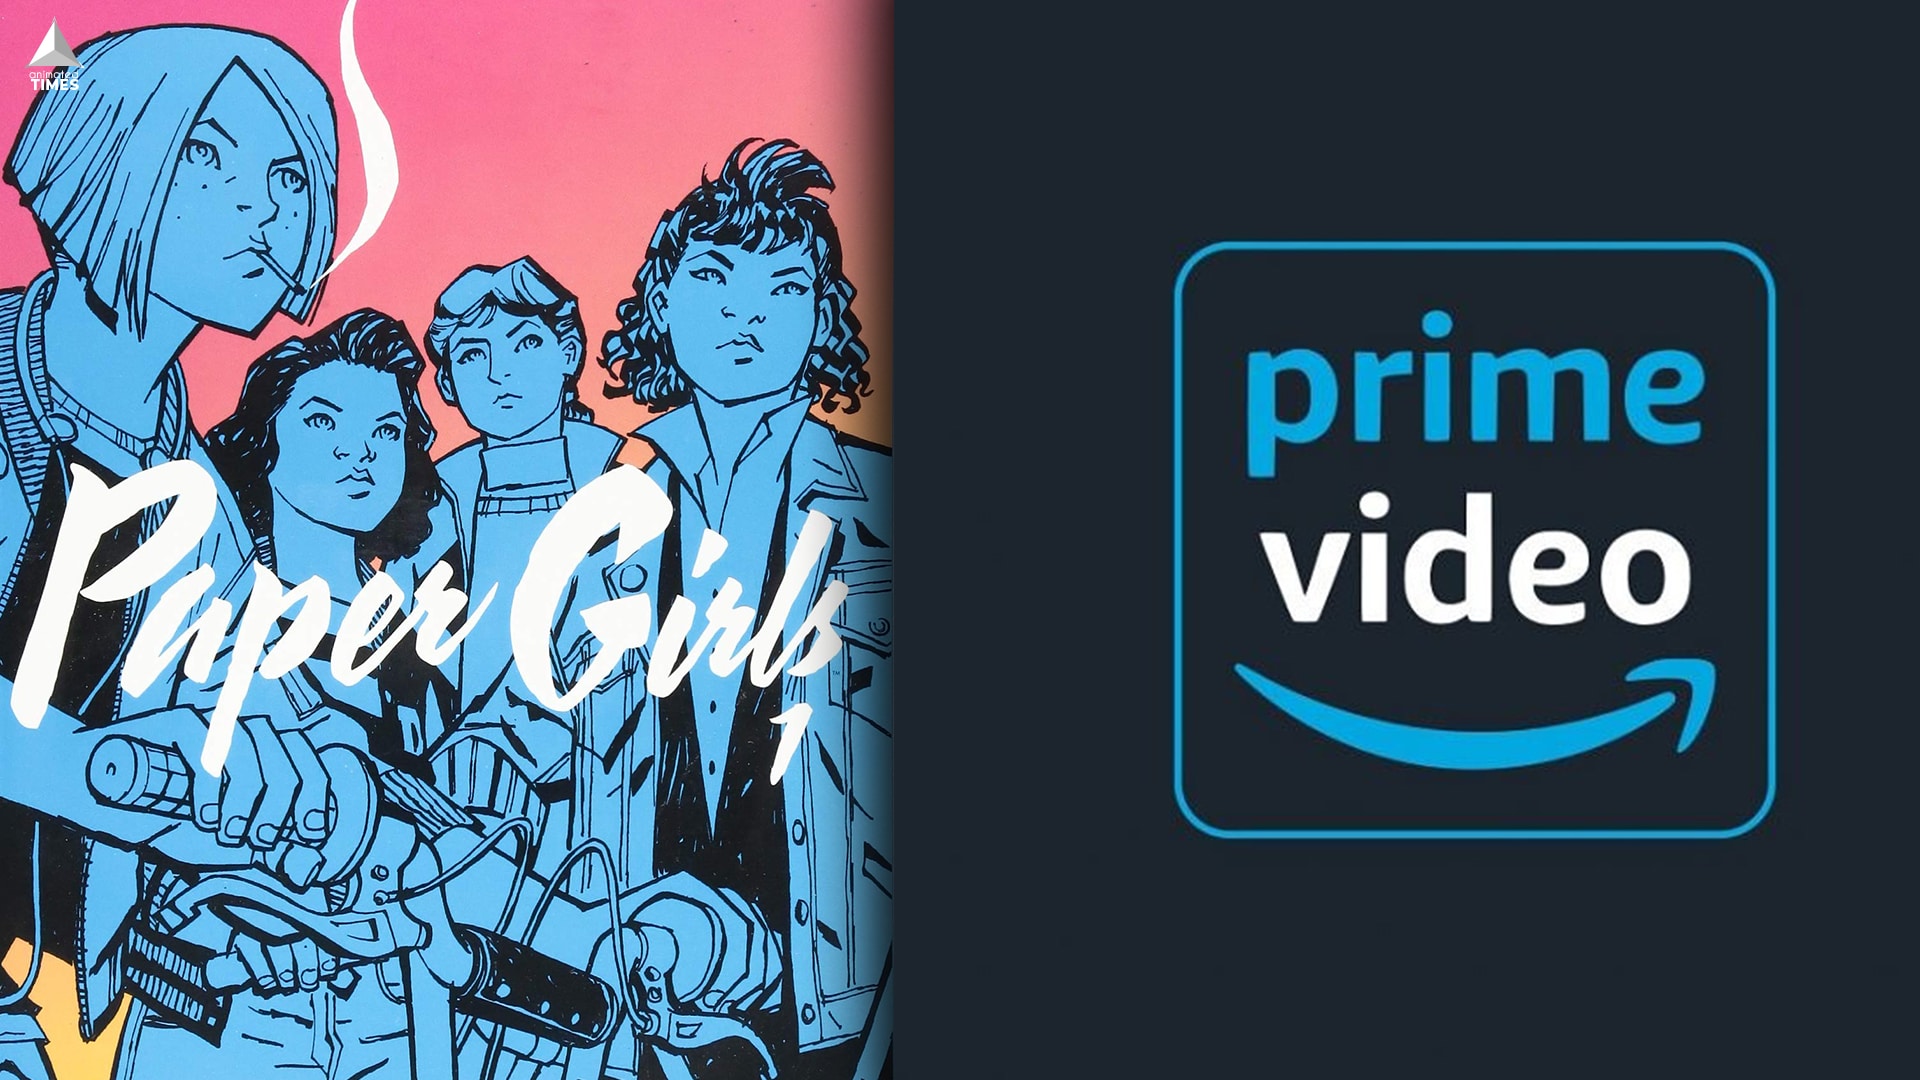 What You Need to Know About Amazon’s Upcoming Paper Girls TV Show